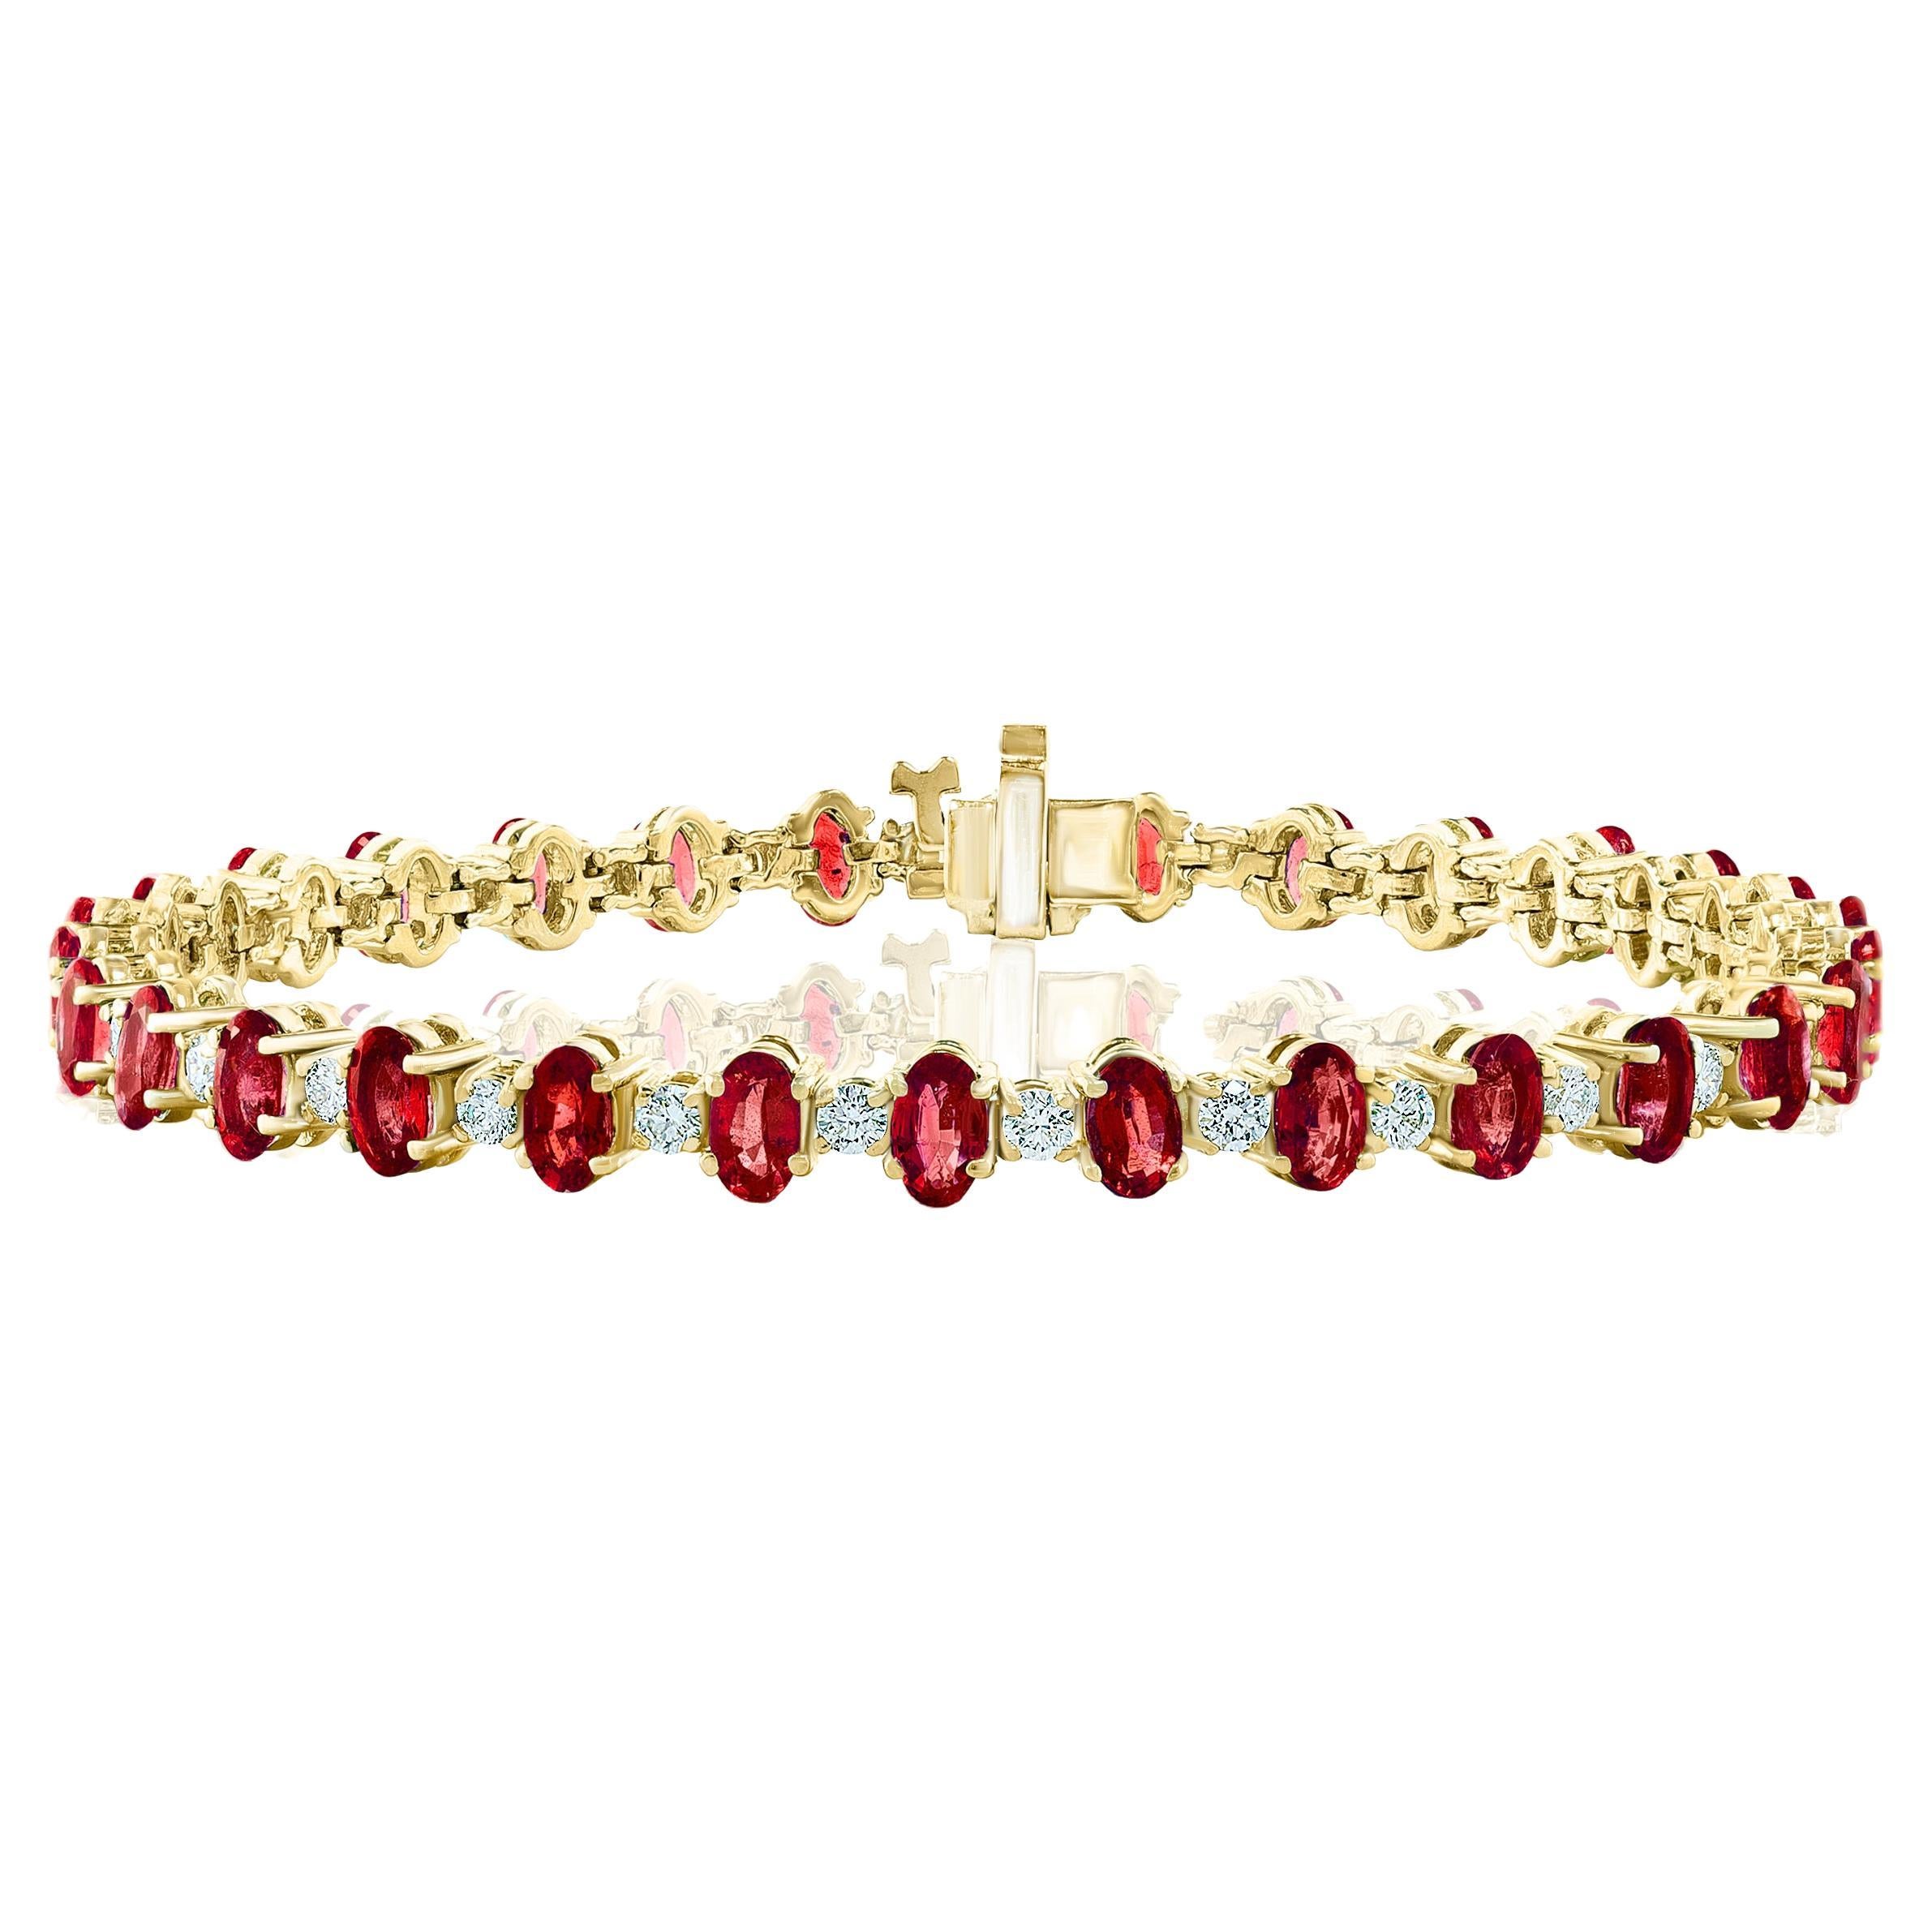 Grandeur 9.27 Carats Oval Cut Ruby and Diamond Bracelet in 14k Yellow Gold